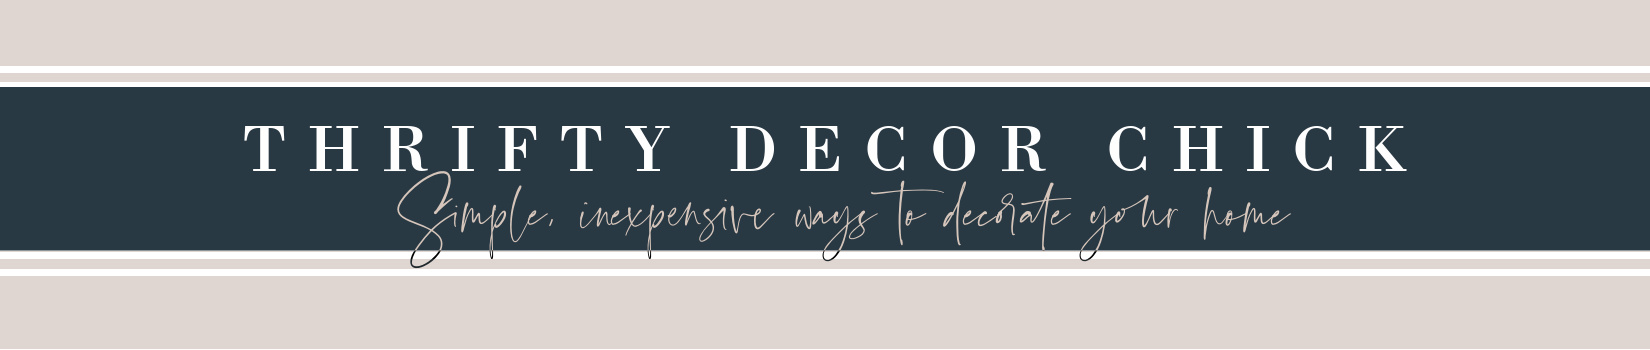 The new & improved Thrifty Decor Chick!